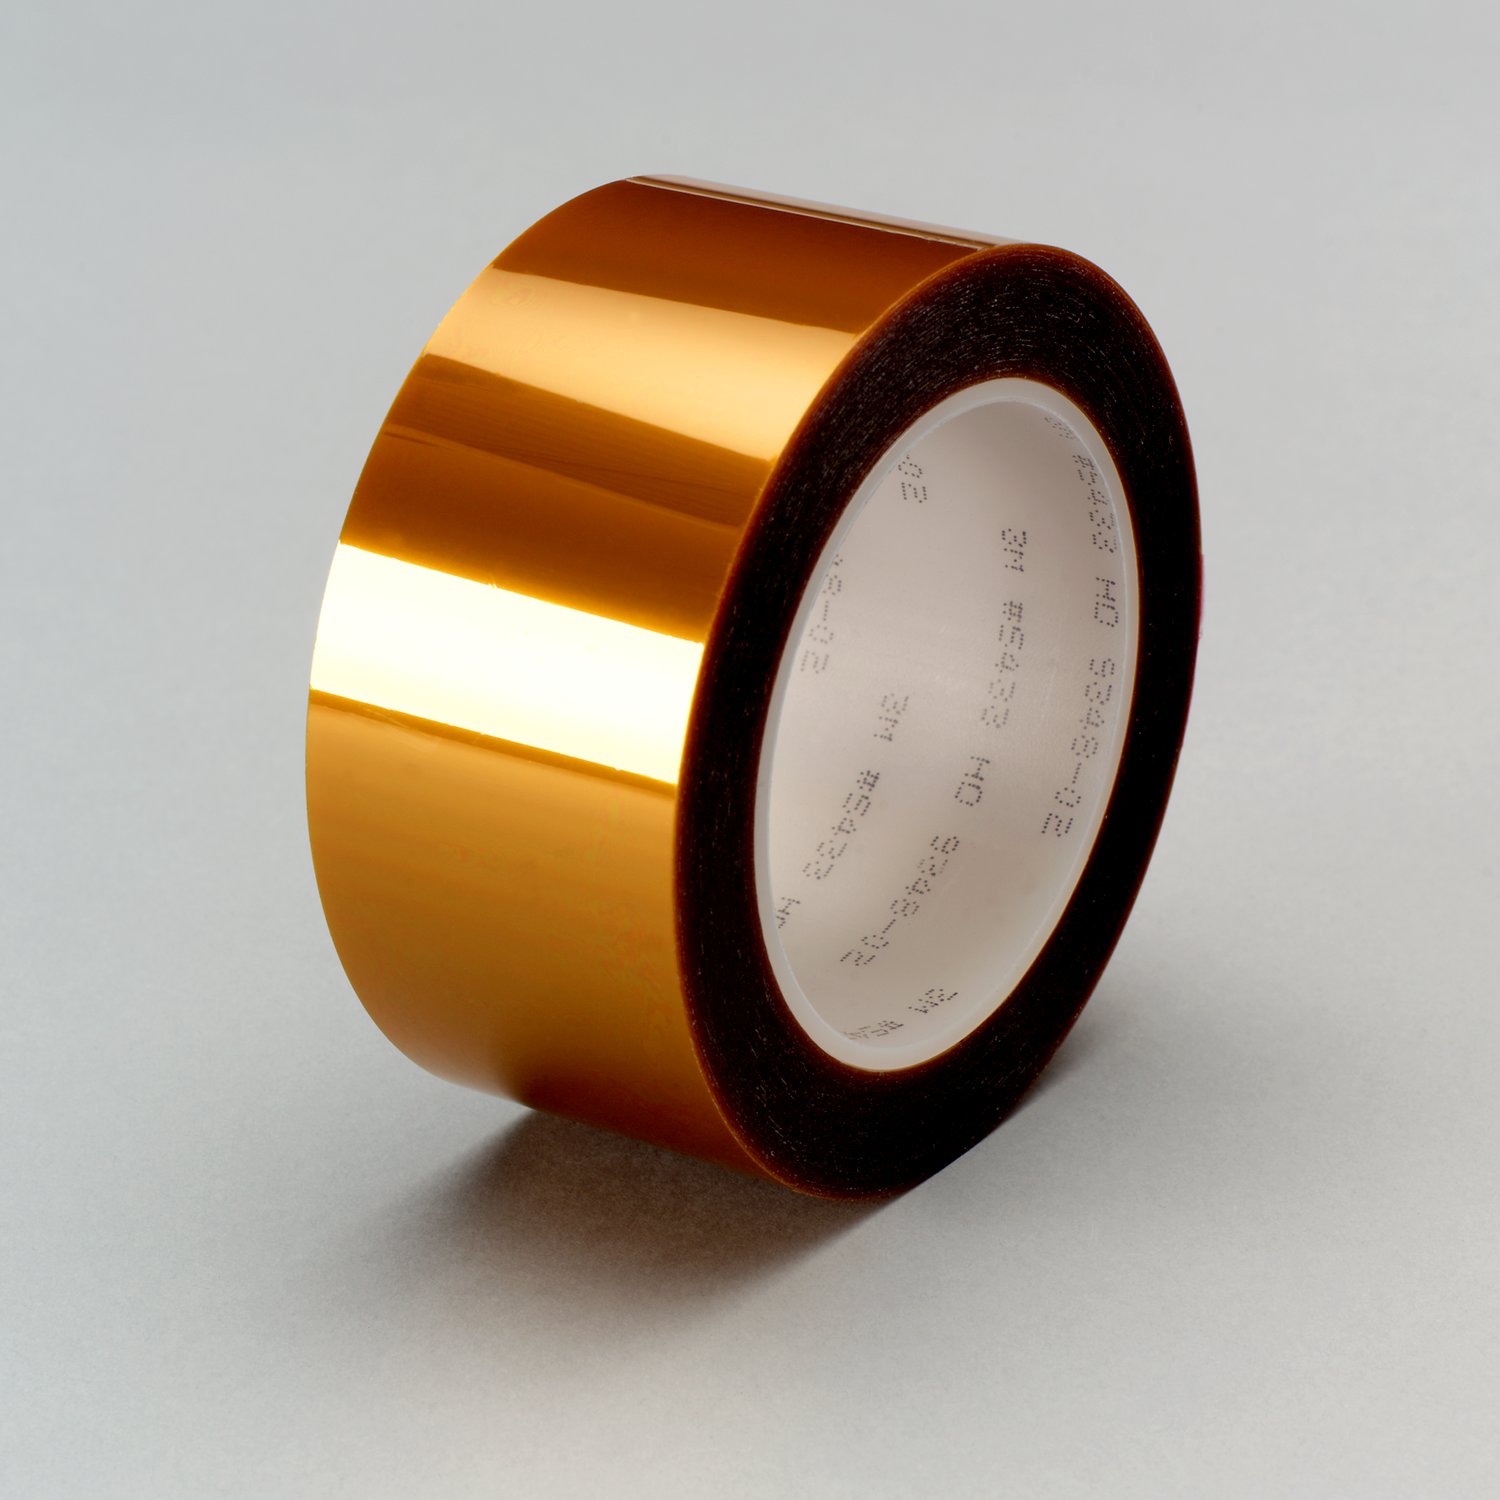 7100142982 - 3M Linered Low-Static Polyimide Film Tape 5433 Amber, 24 in x 36 yds x
2.7 mil, 1/Case, Bulk